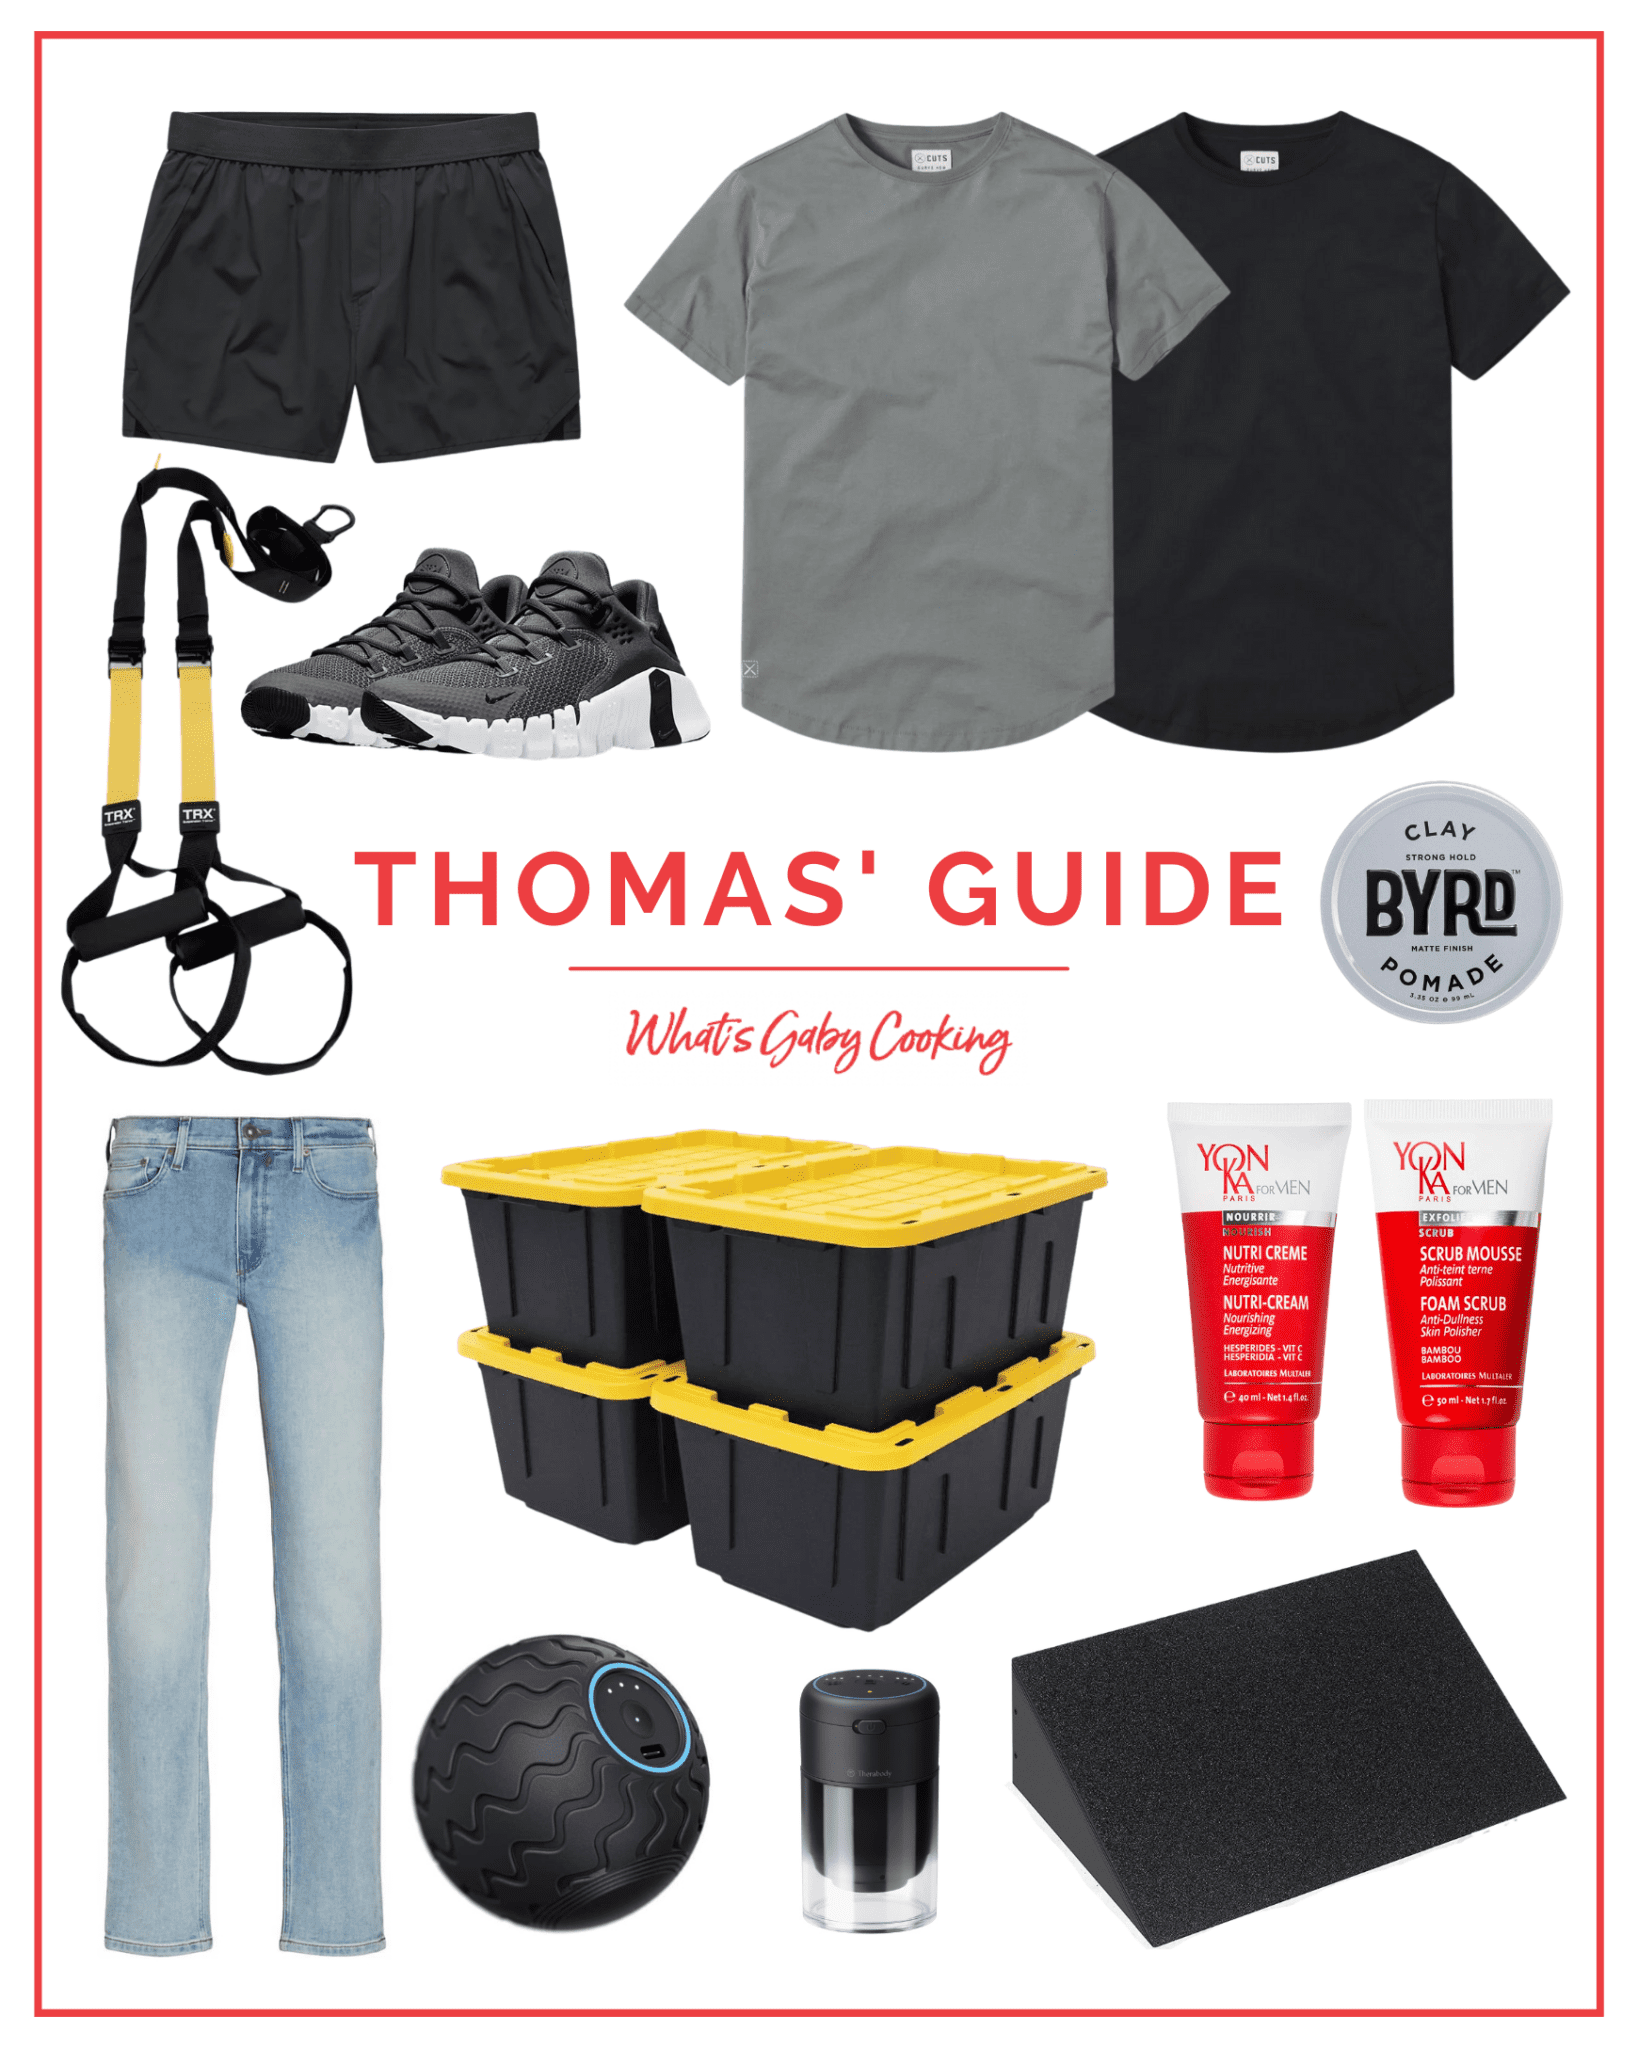 Thomas' Guide Gift Guide